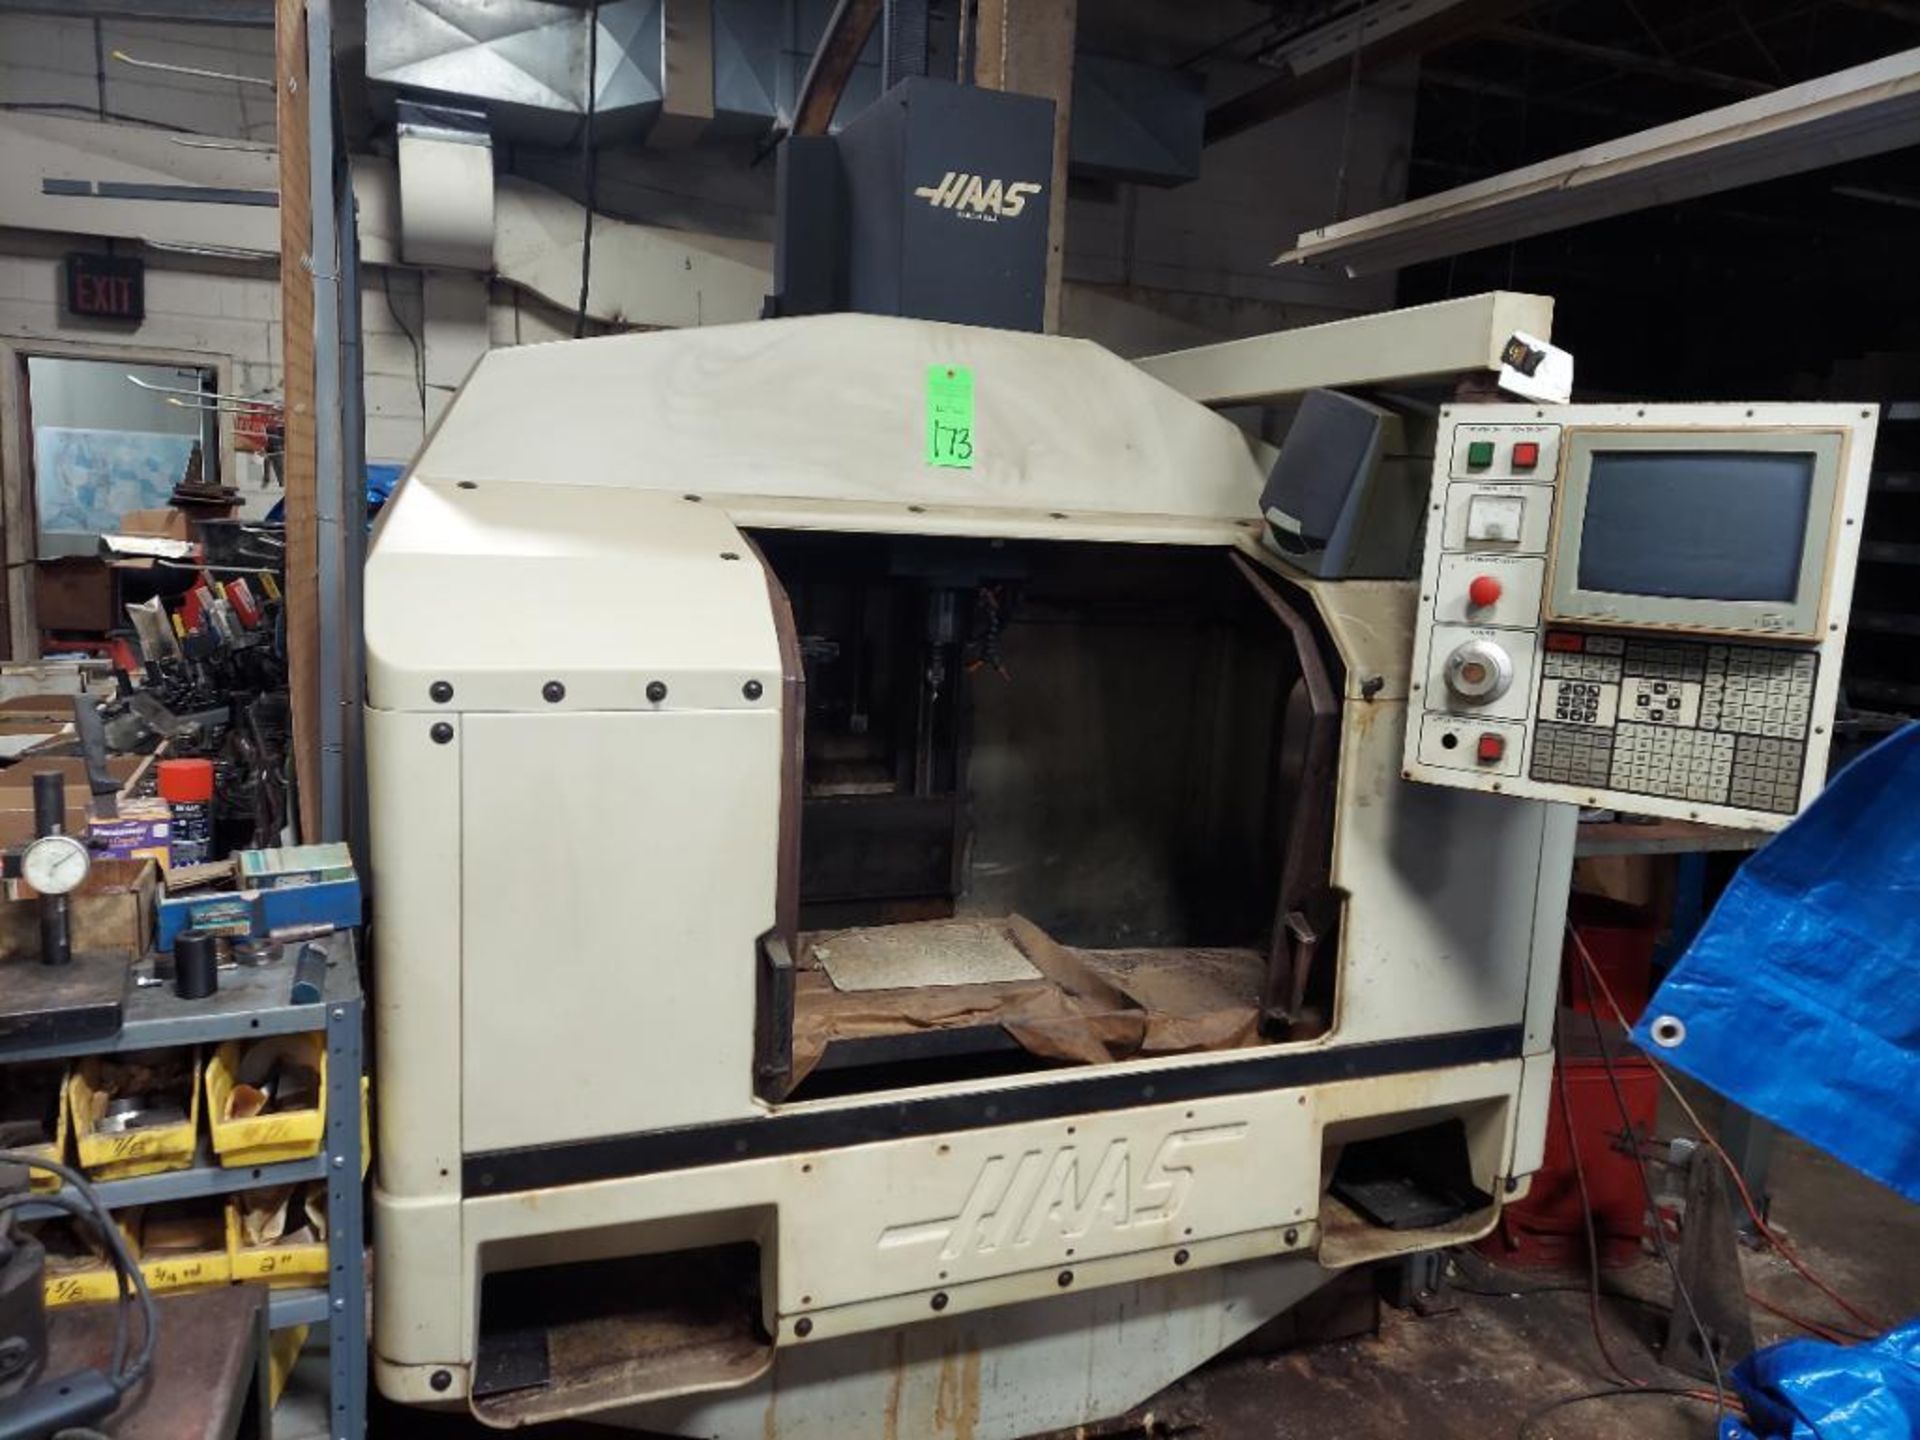 1989 Haas VF-1 Vertical Machining Center - Parts Only